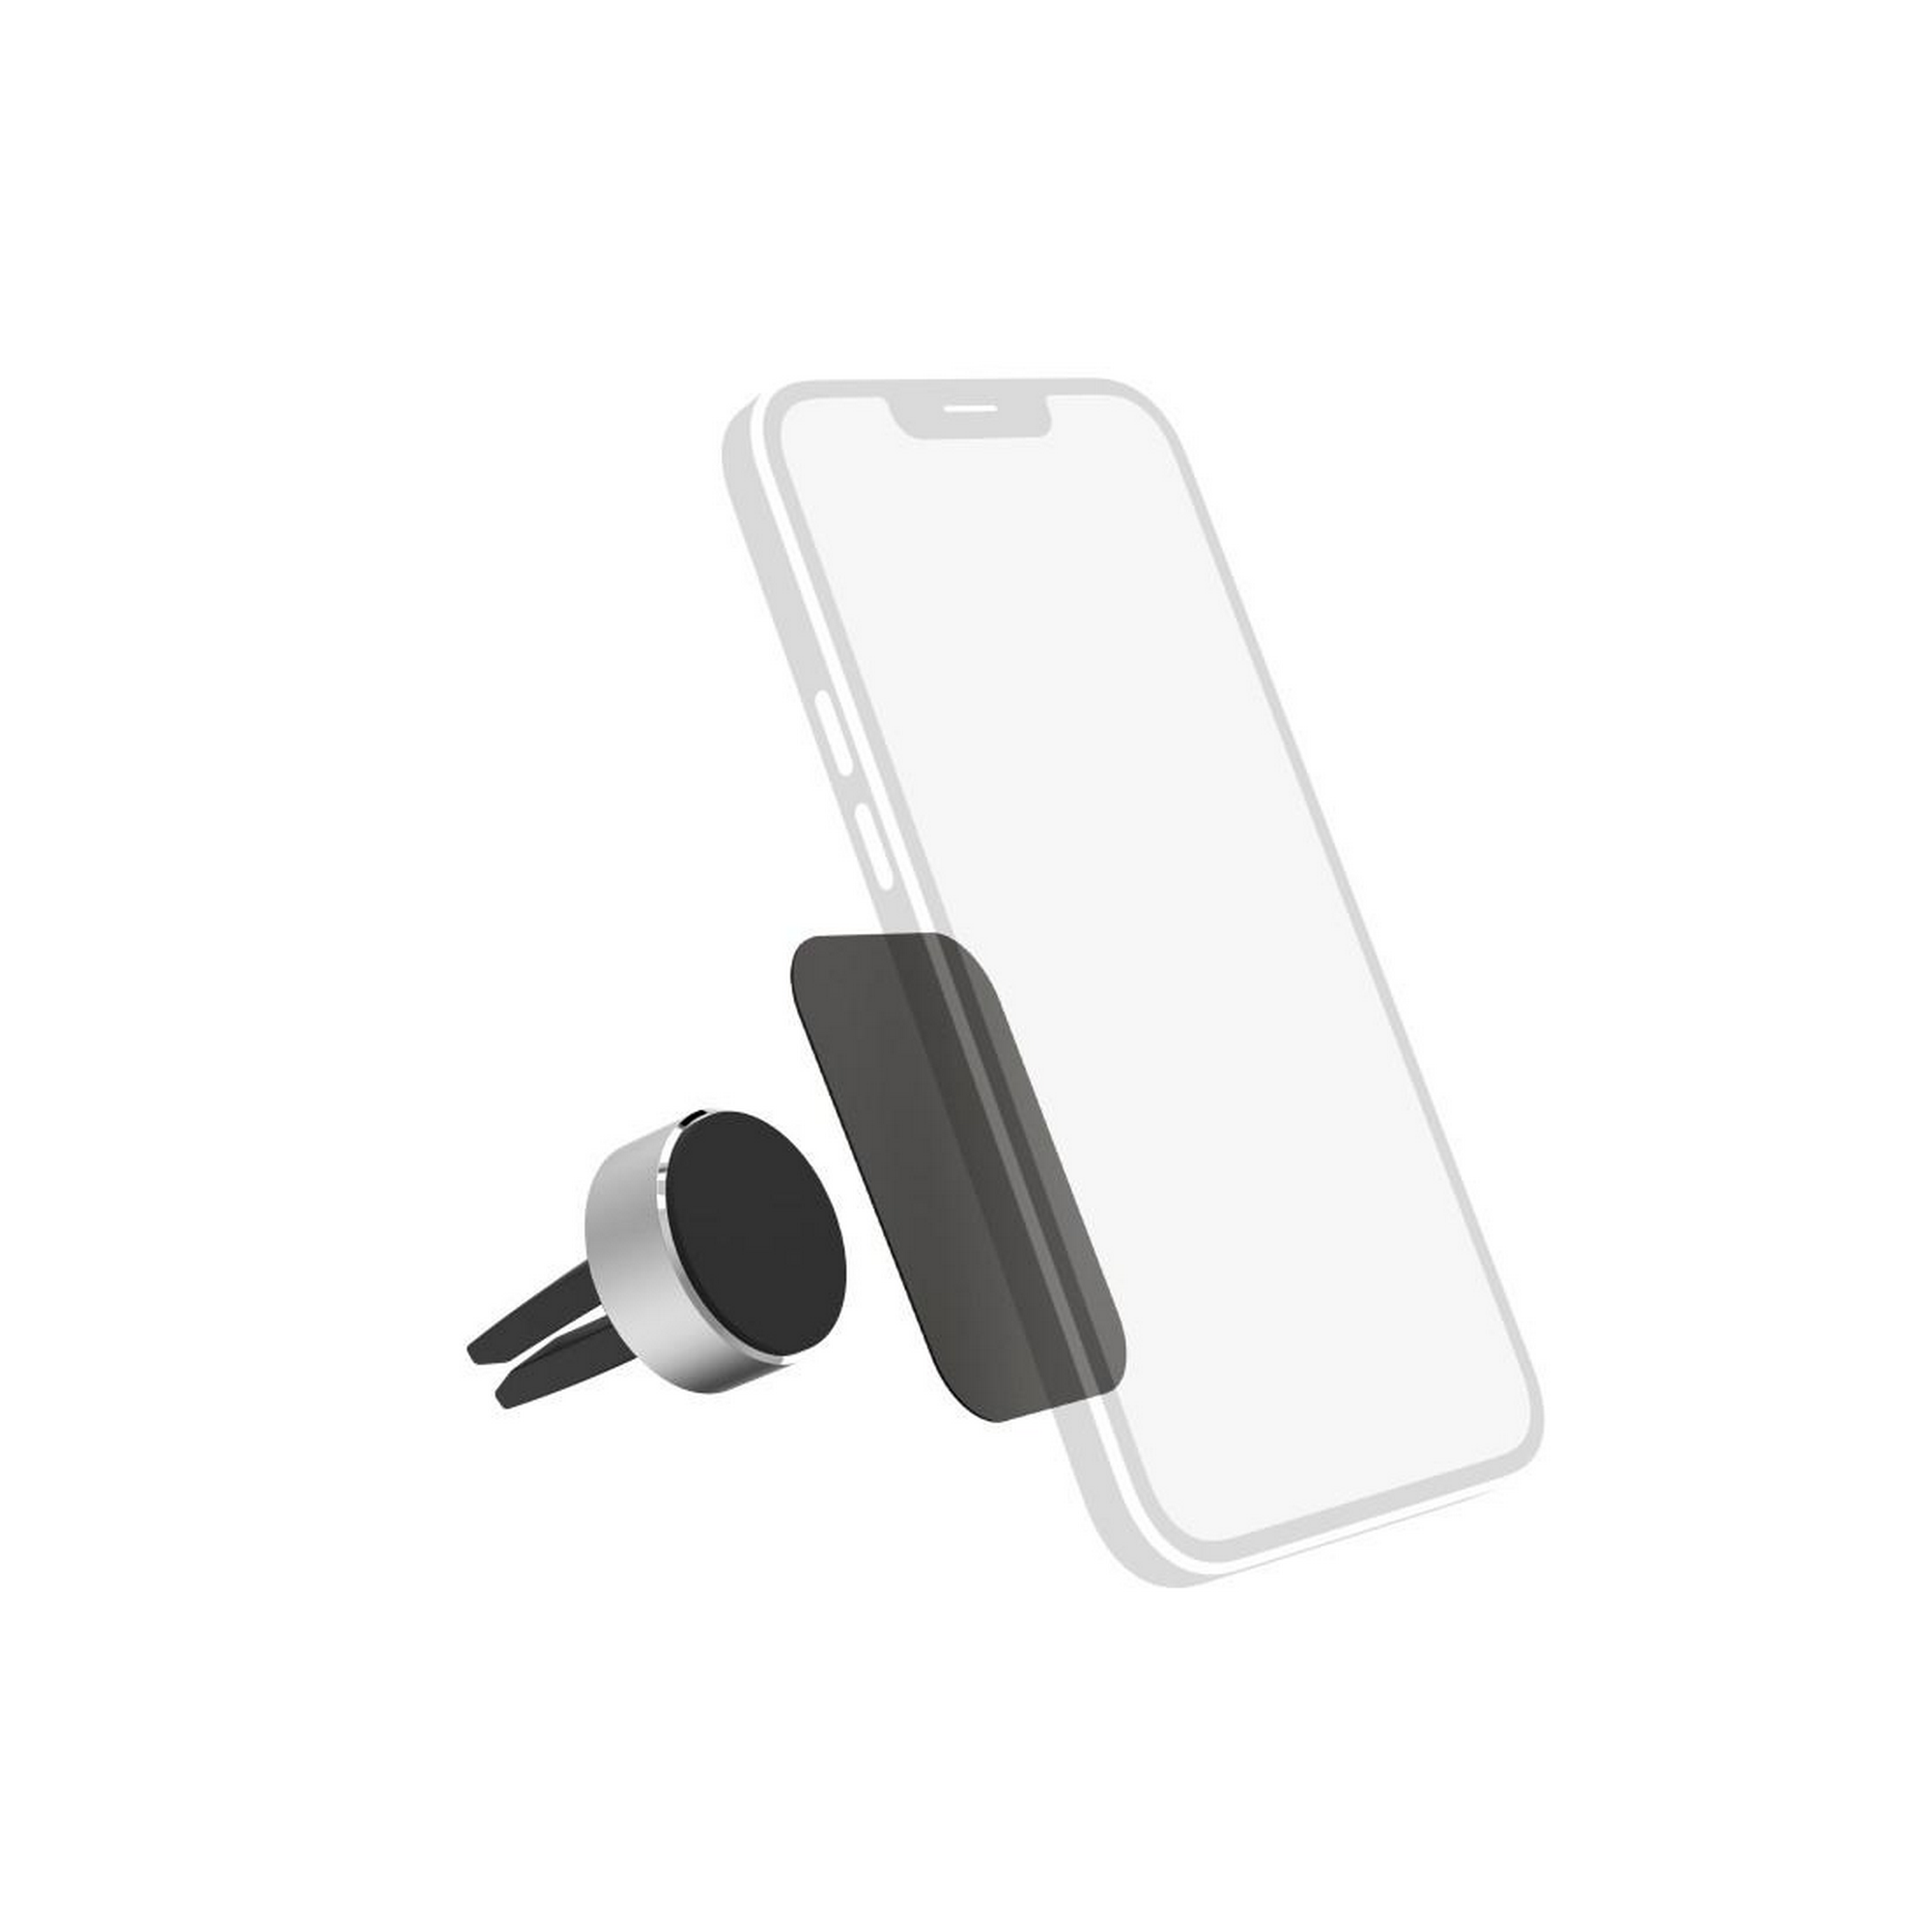 Universal-Smartphone-Halterung + product picture